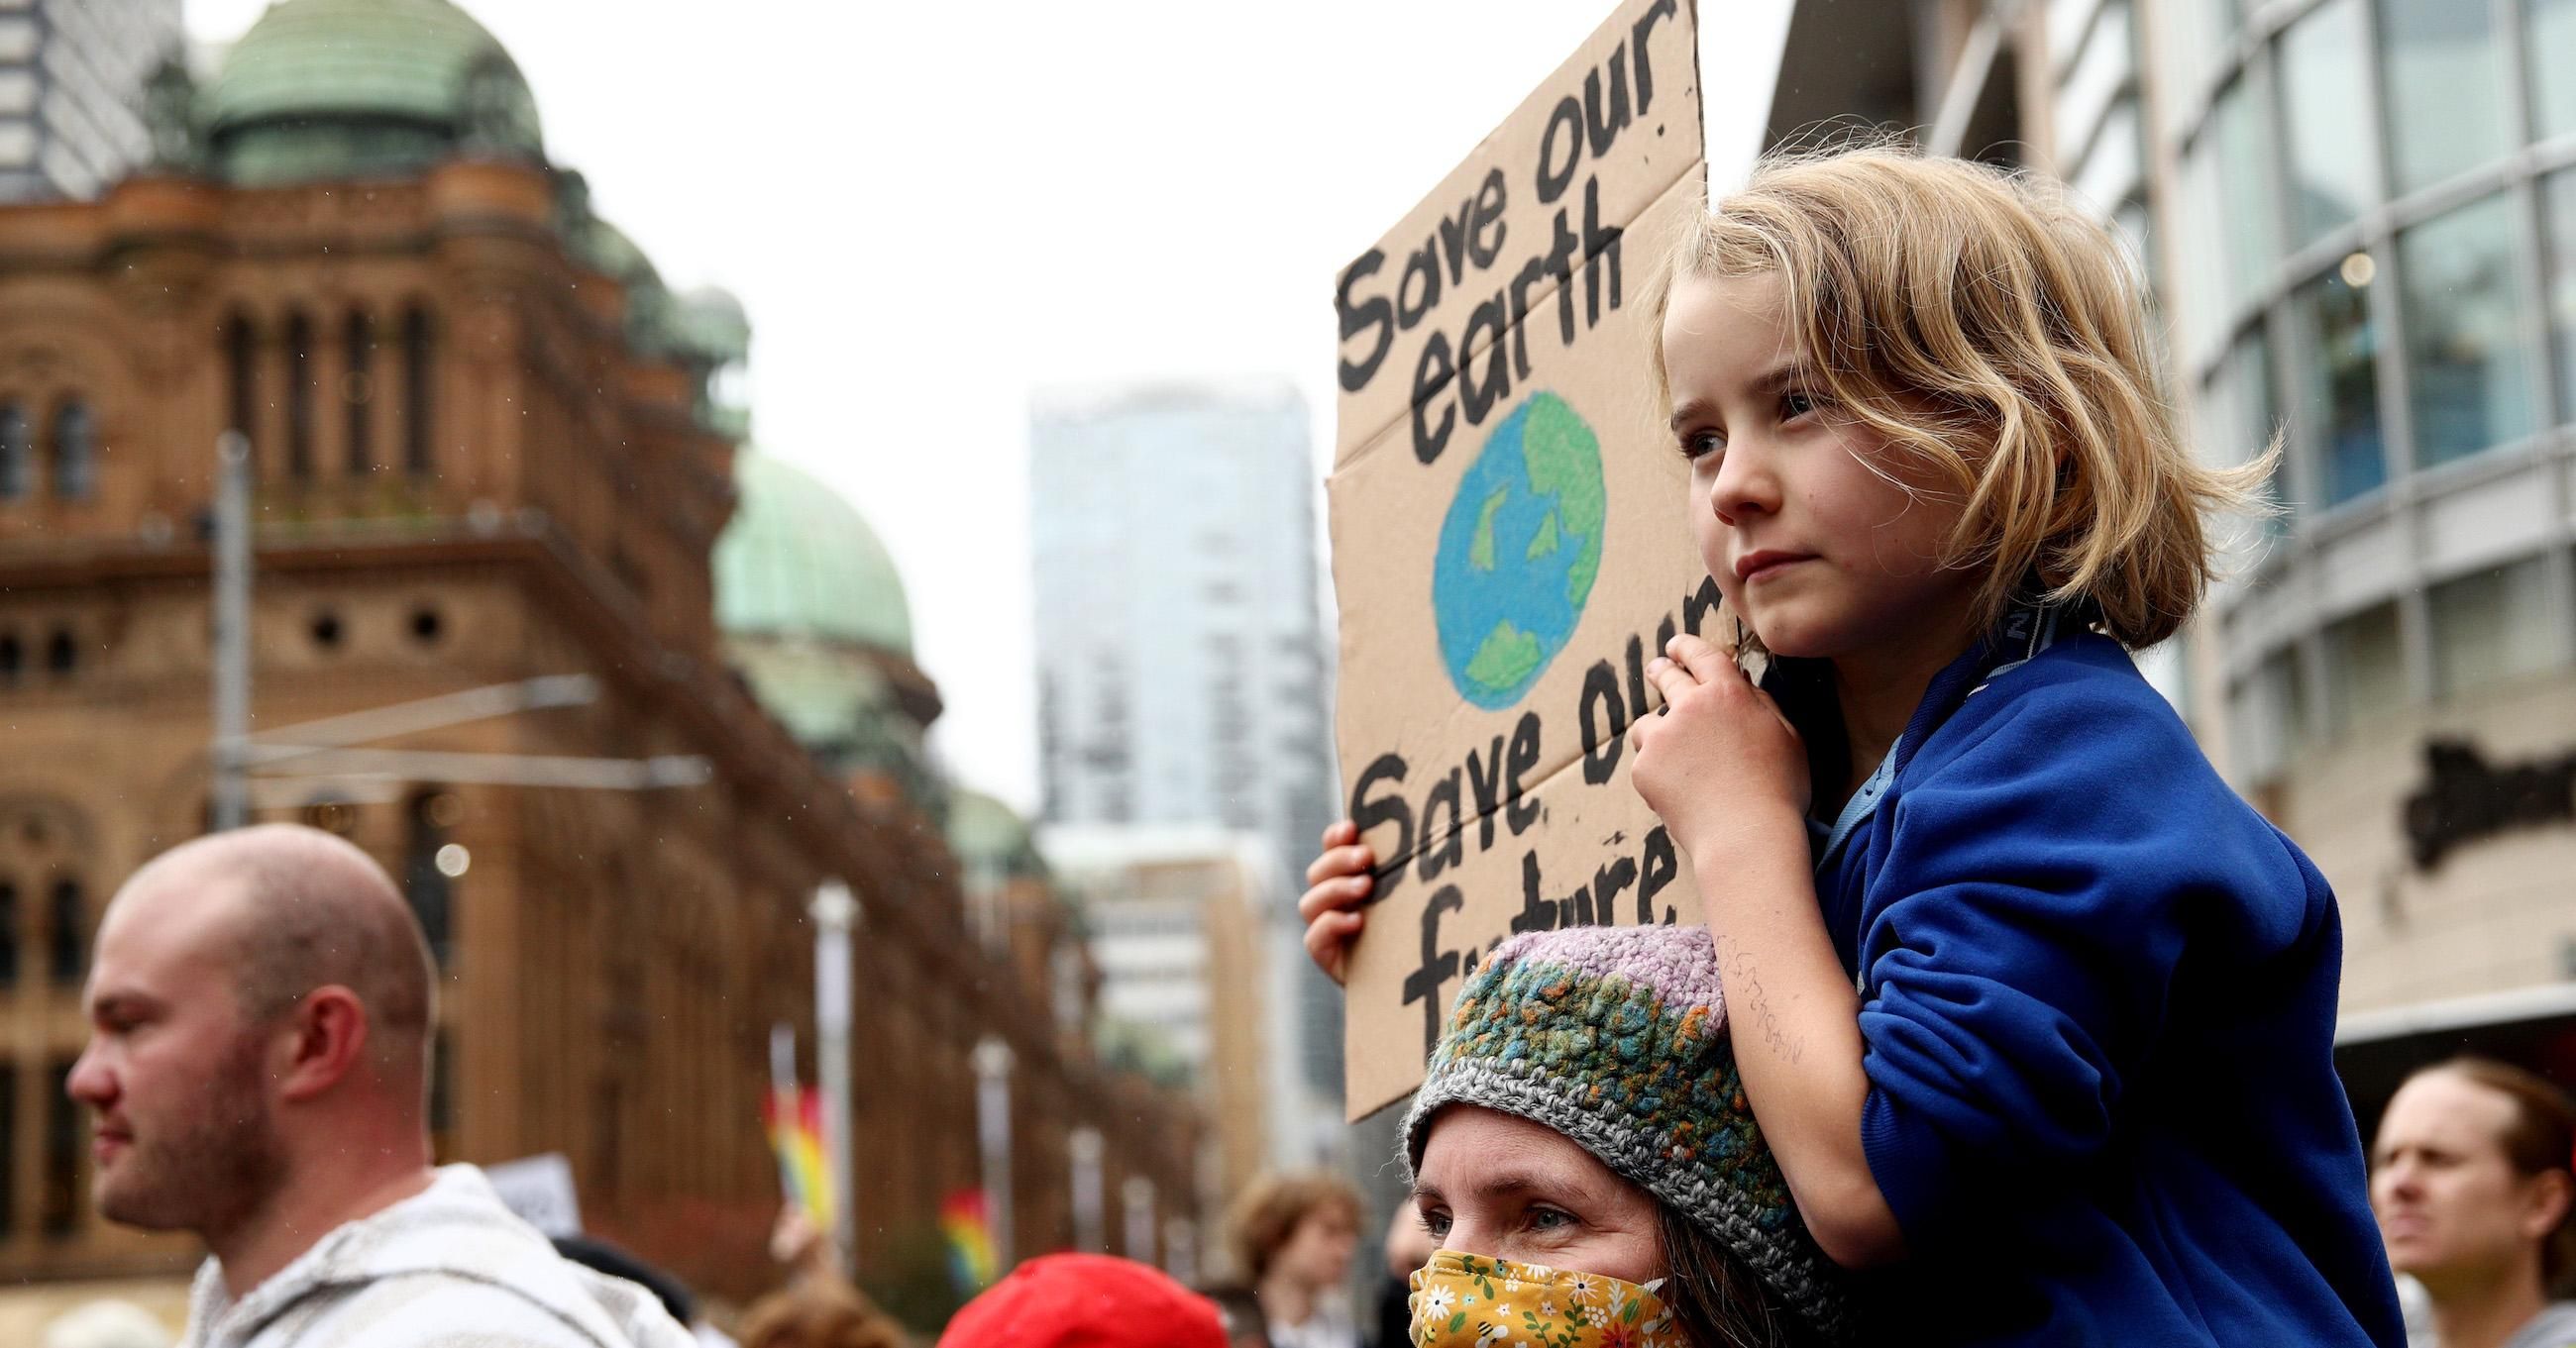 A child holds a sign at Town Hall during the School Strike 4 Climate rally on May 21, 2021 in Sydney, Australia. School Strike 4 Climate rallies are being held across Australia, with students protesting government inaction on the climate emergency. (Photo: Don Arnold/Getty Images)